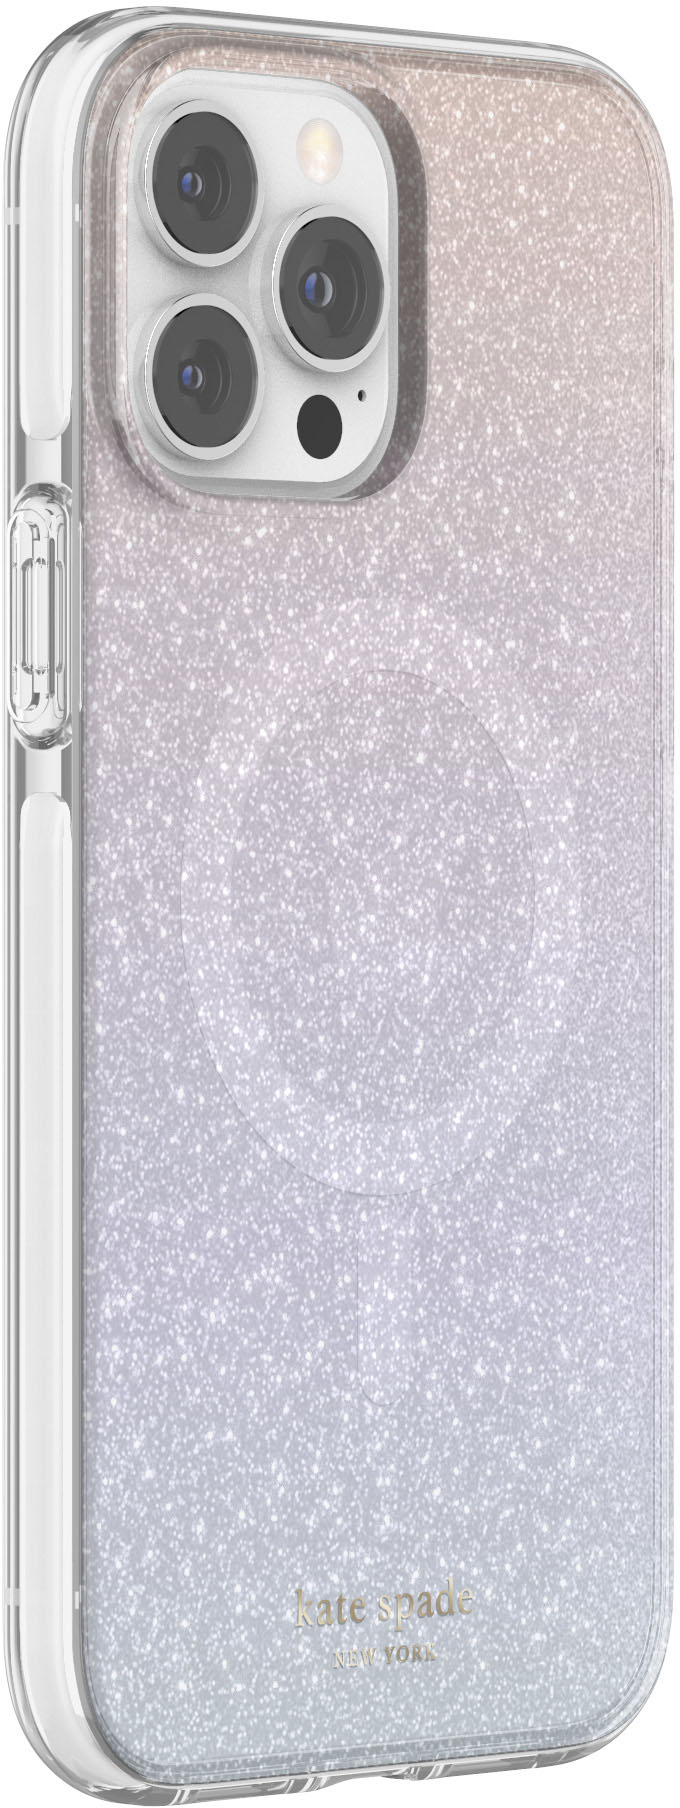 Angle View: kate spade new york - Defensive Case for iPhone 13 Pro - Ombre Glitter